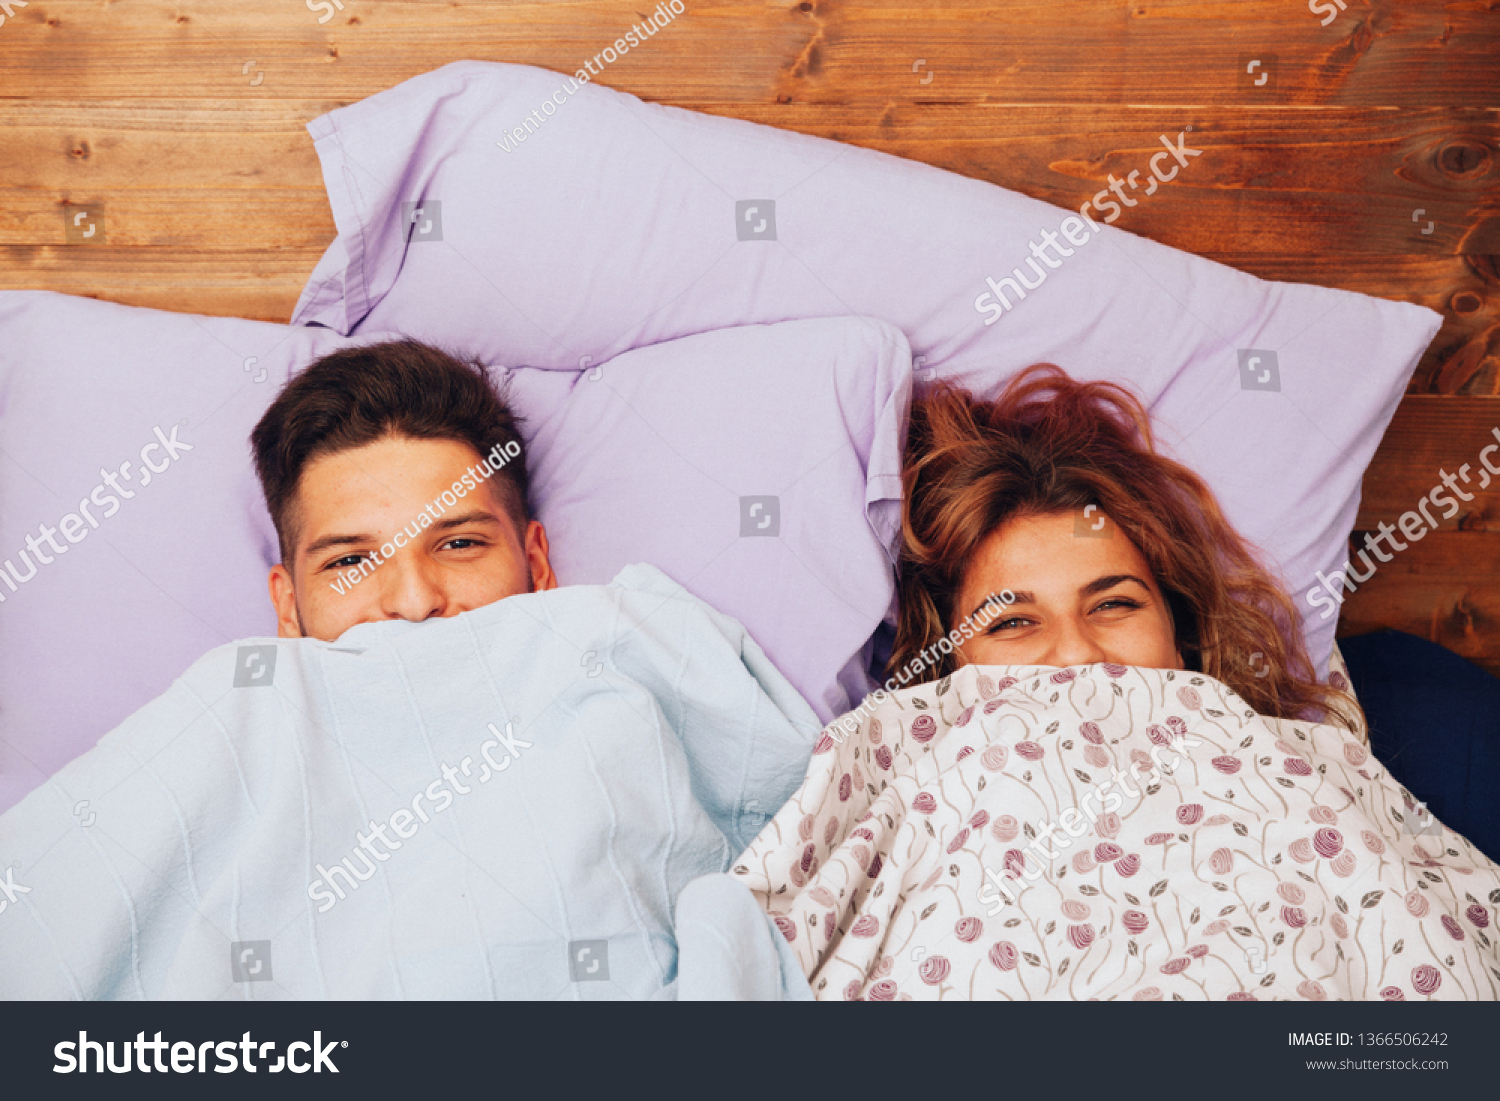 Young smiling heterosexual couple lying down together on the bed #1366506242